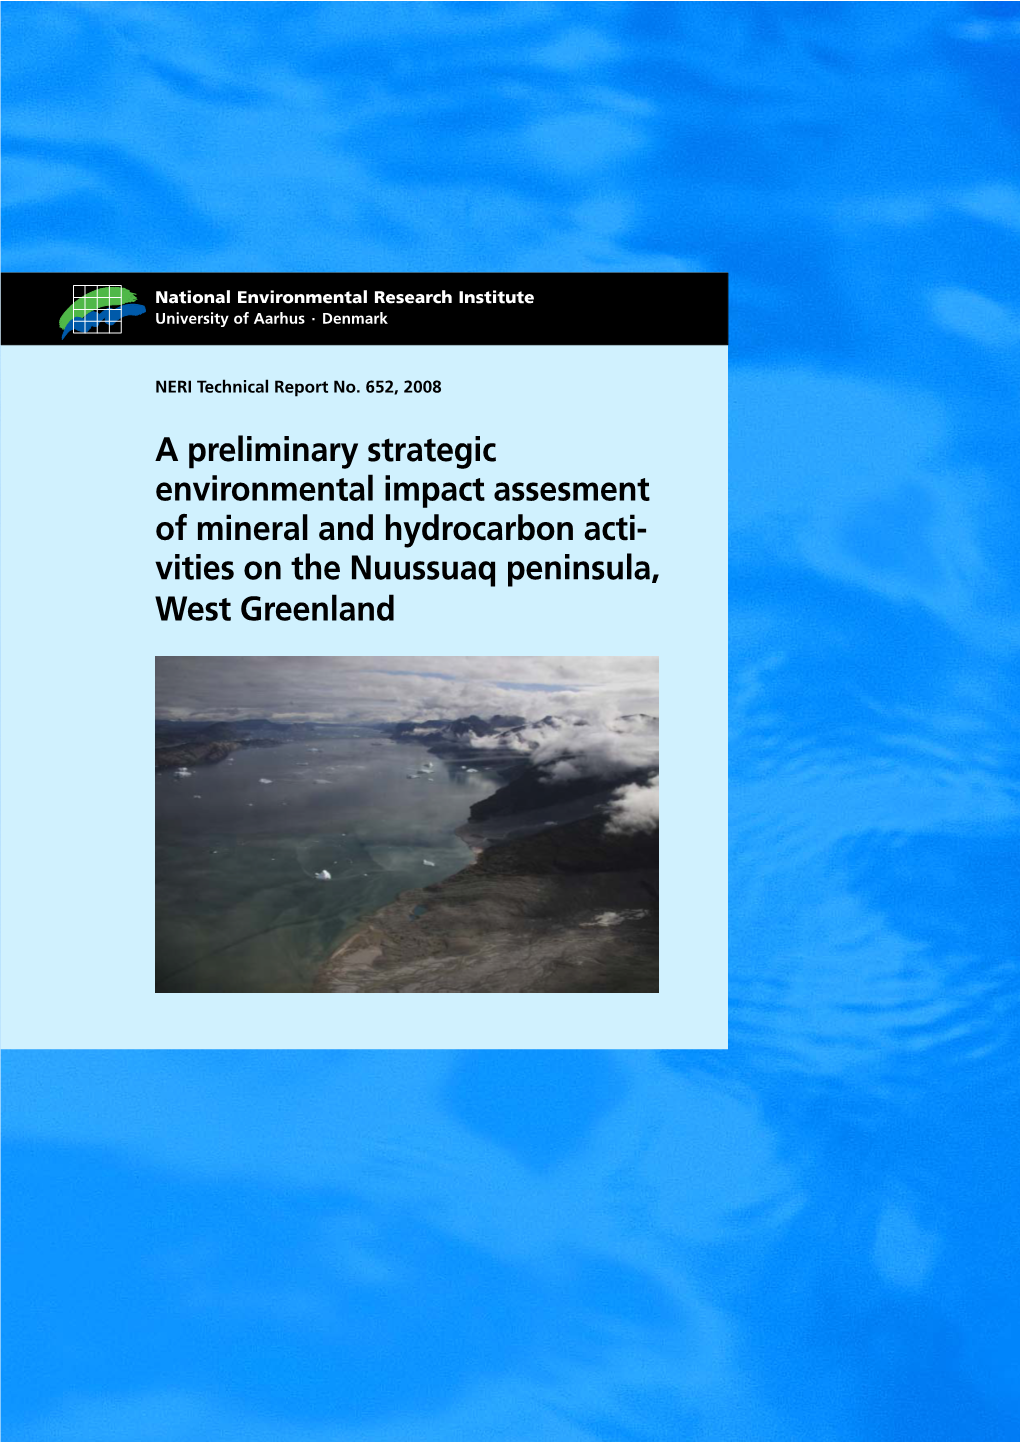 A Preliminary Strategic Environmental Impact Assessment of Mineral and Hydrocarbon Activities on the Nuussuaq Peninsula, West Greenland